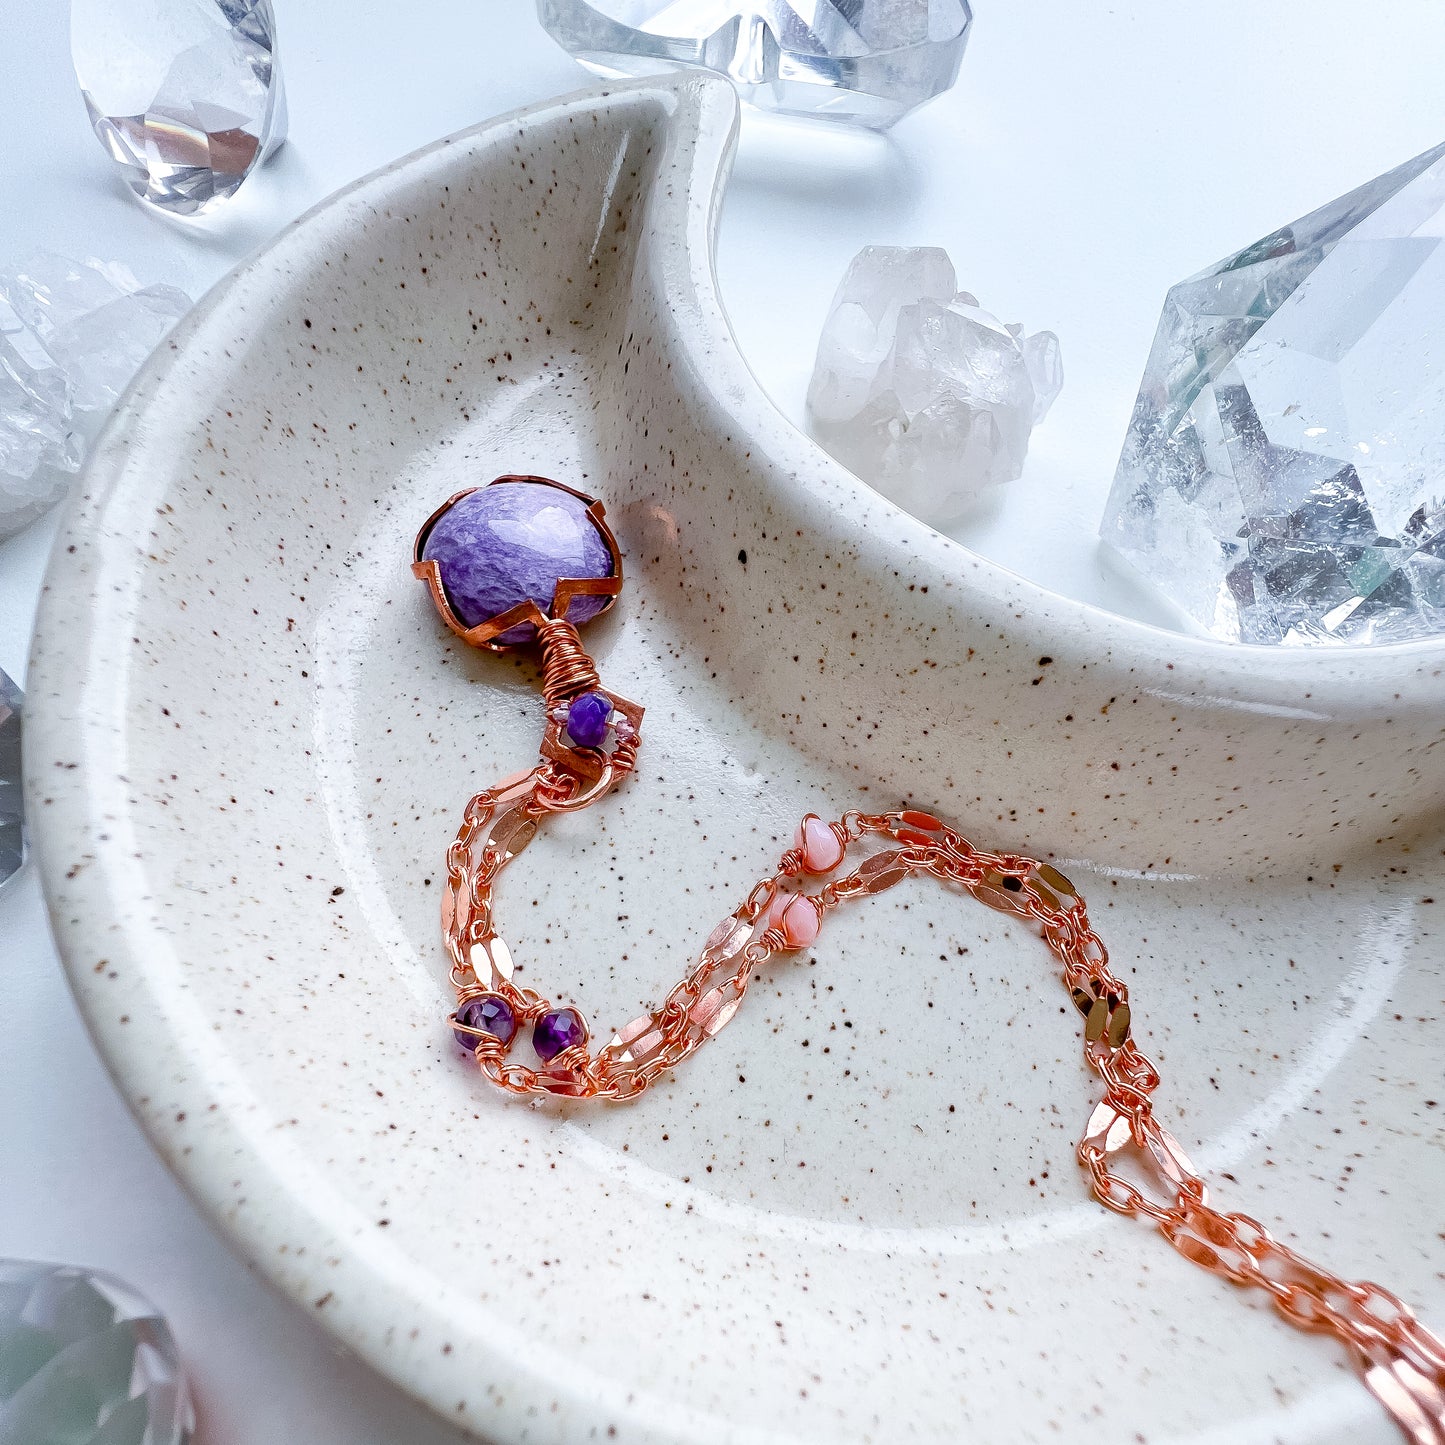 Charoite Necklace - Uniting spirit, heart and healing.